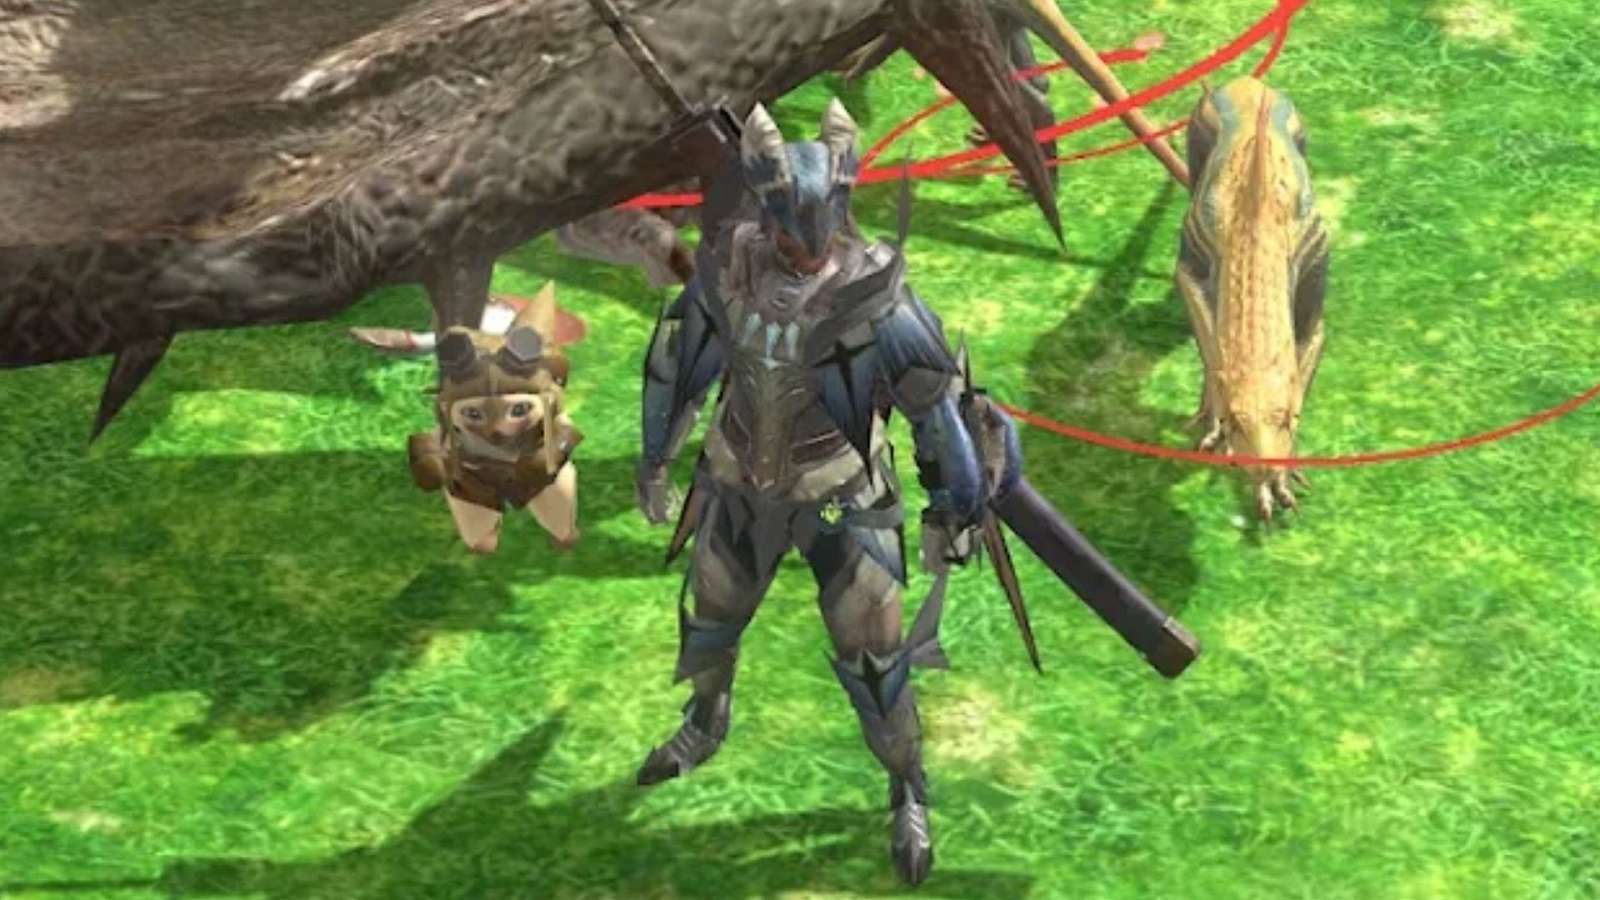 Monster Hunter Now player standing in a field